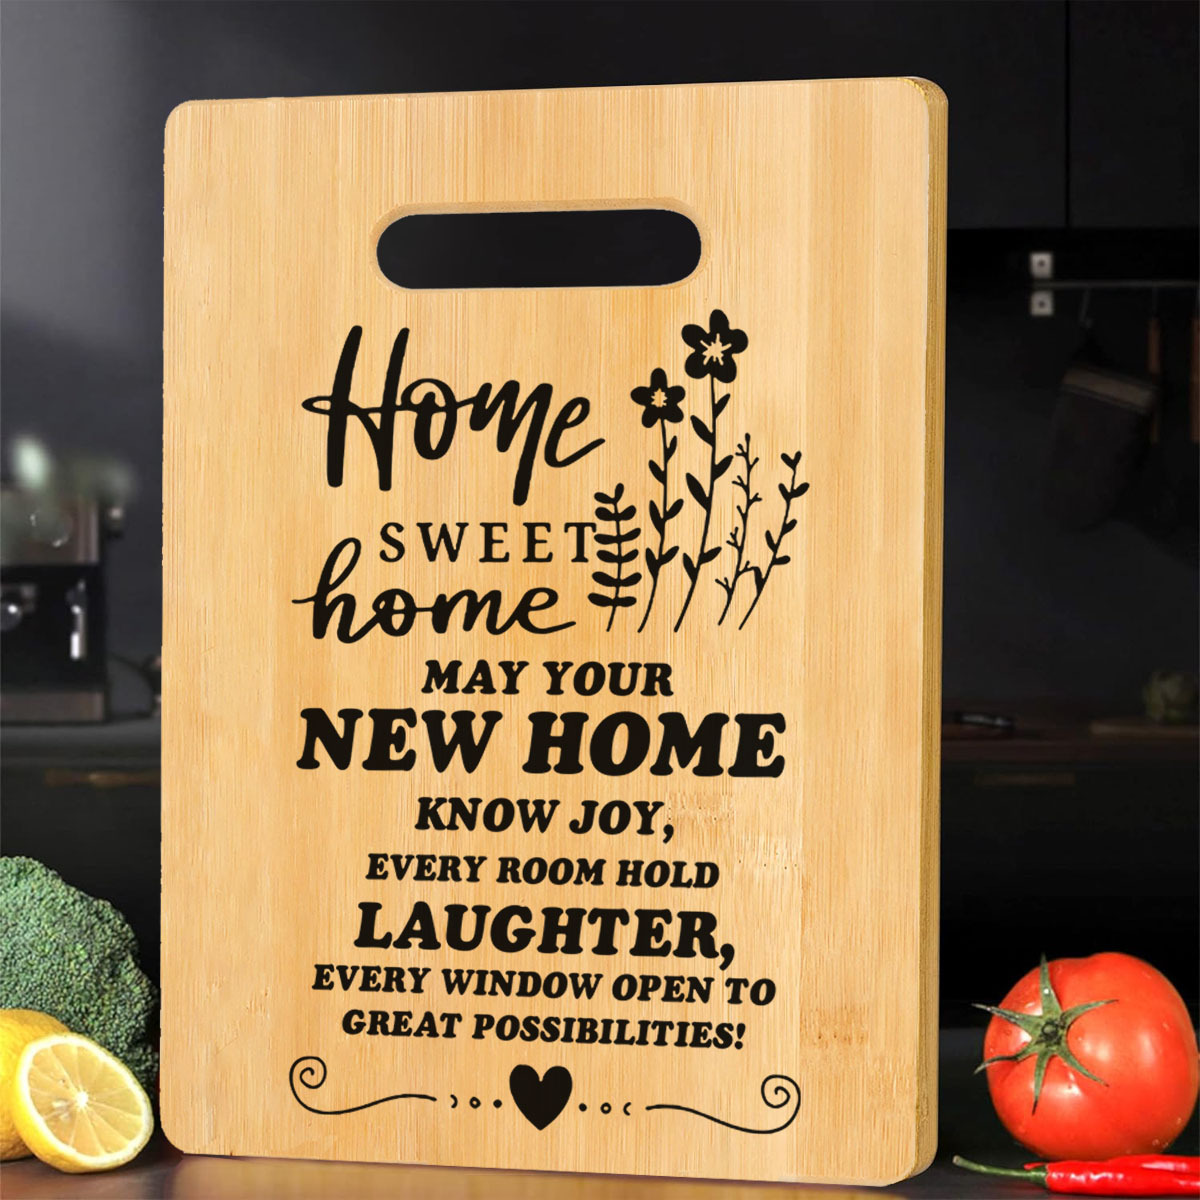 House Warming Gifts New Home,Housewarming Gift,Housewarming Gifts for New  House,New Home Gifts for Home,Home Sweet Home Bamboo Serving Board Candle